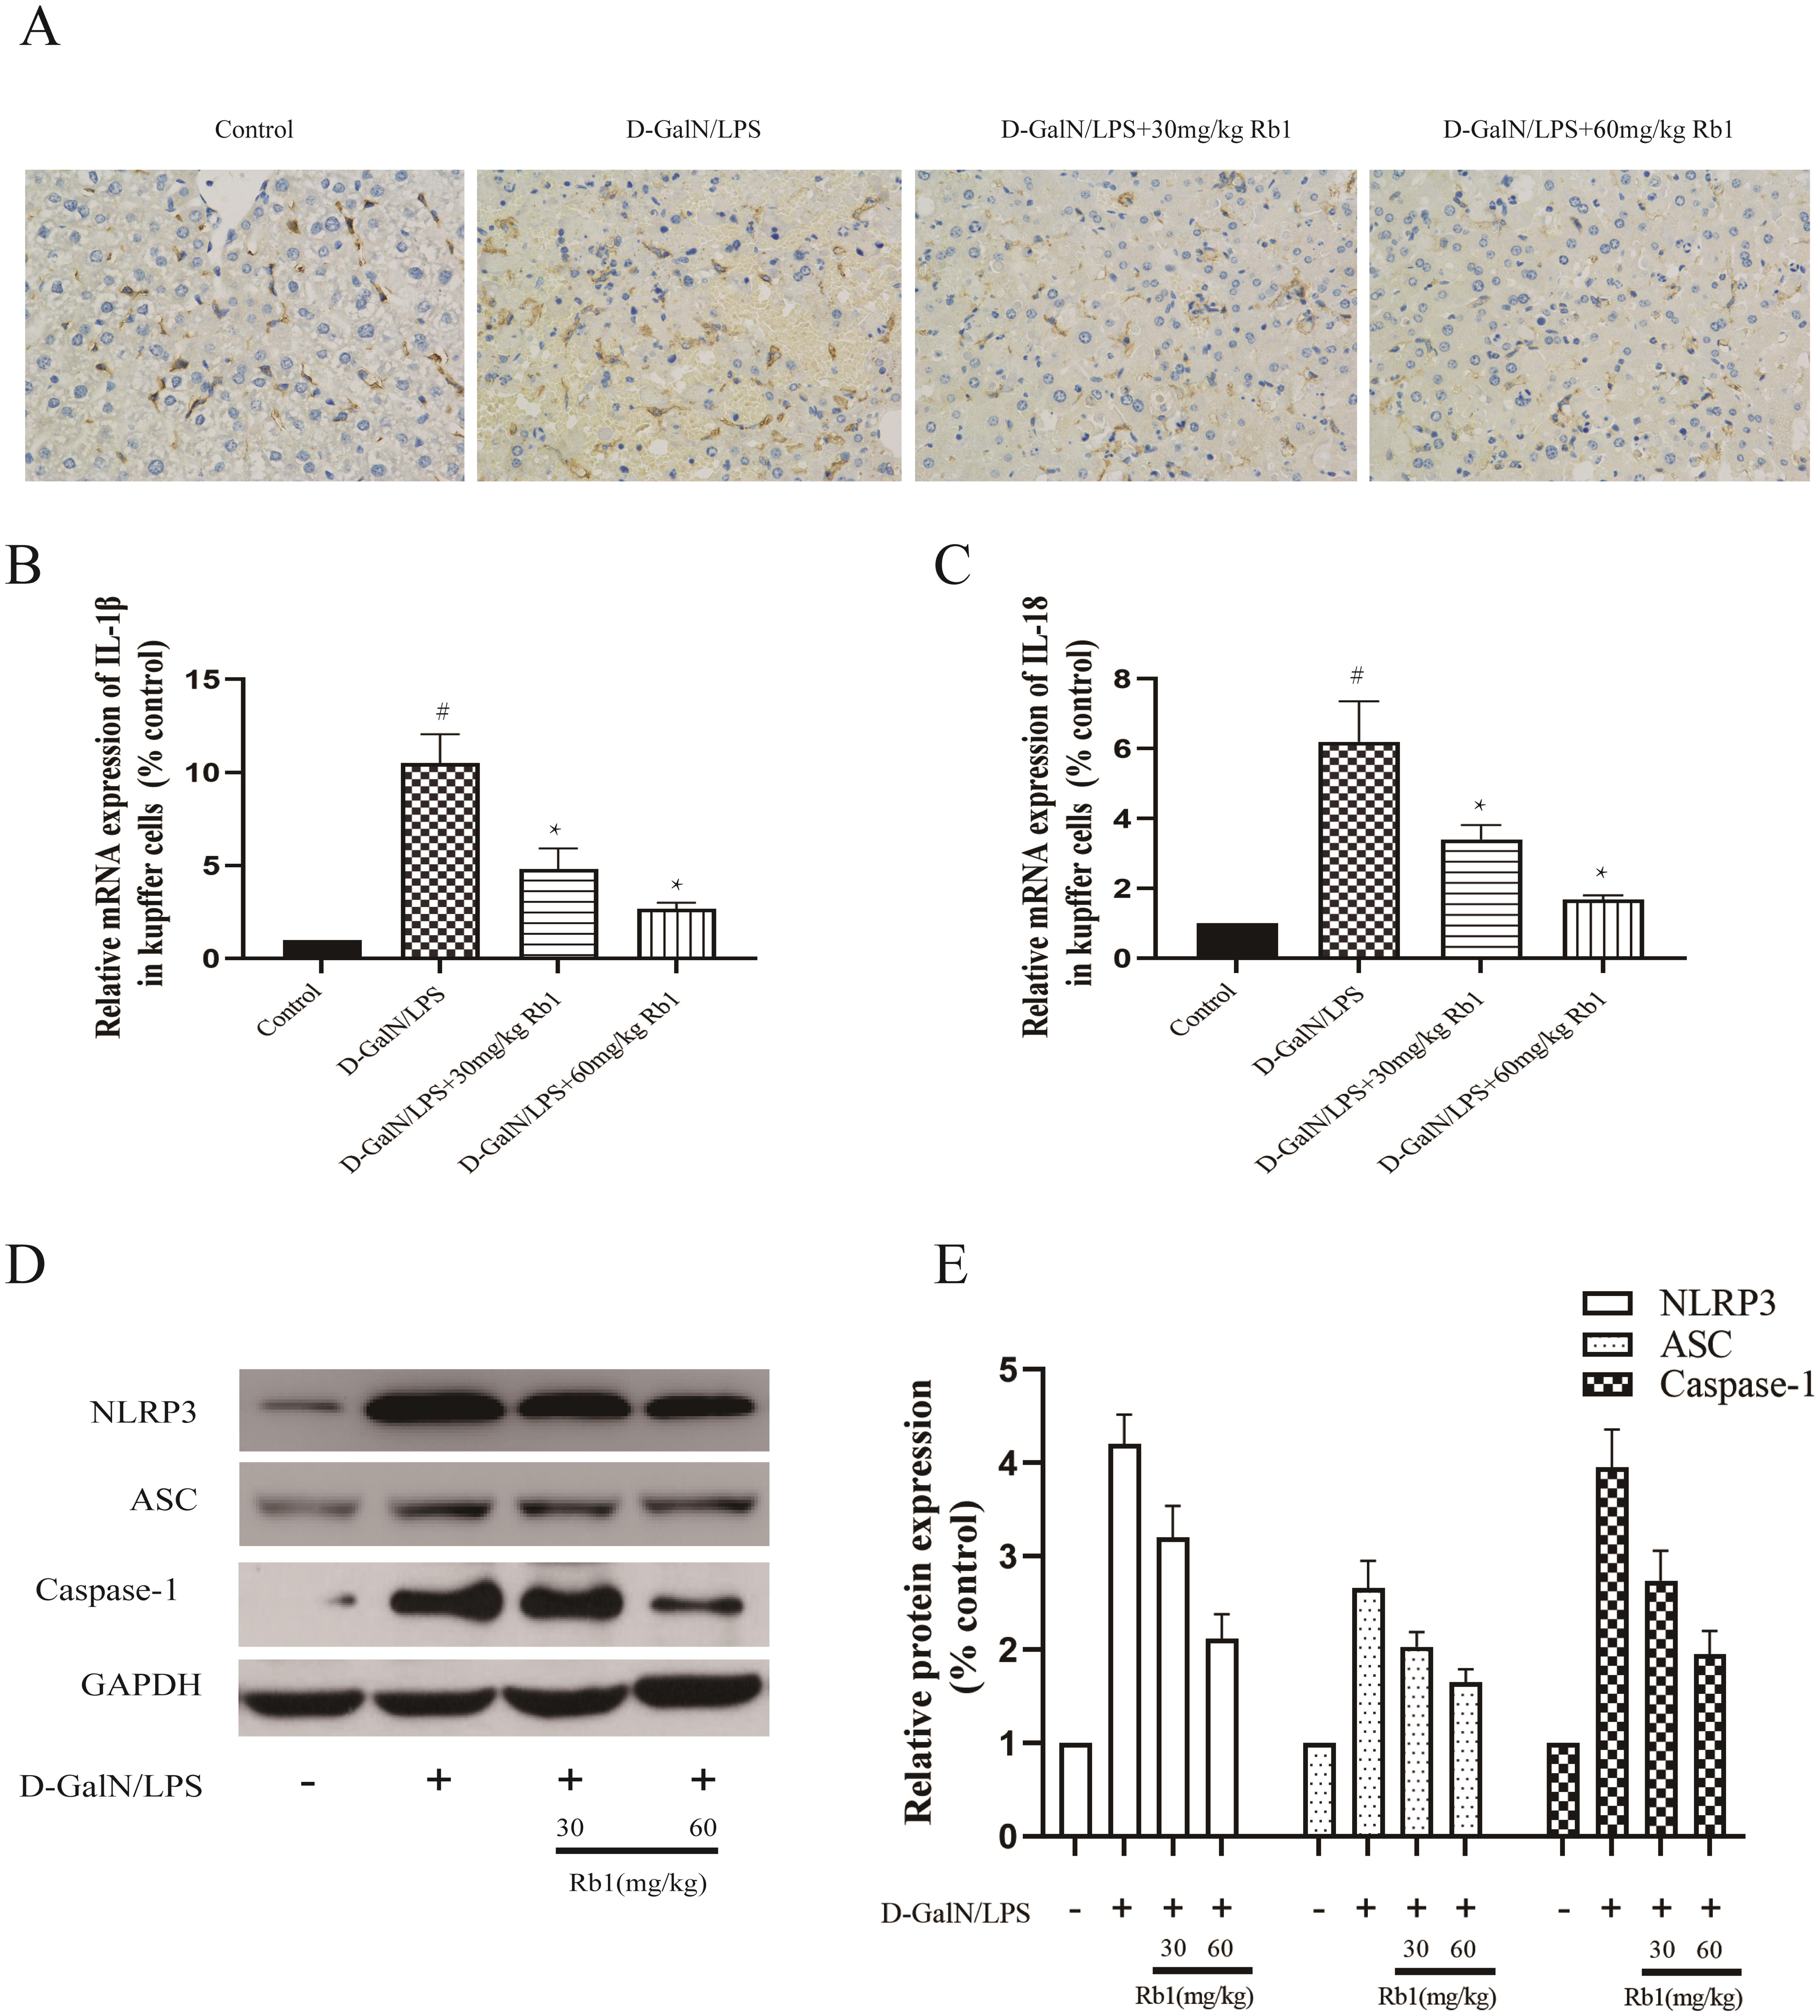 KCs accumulation, and inflammatory cytokine expression and NLRP3 inflammasome activation in KCs among different groups.